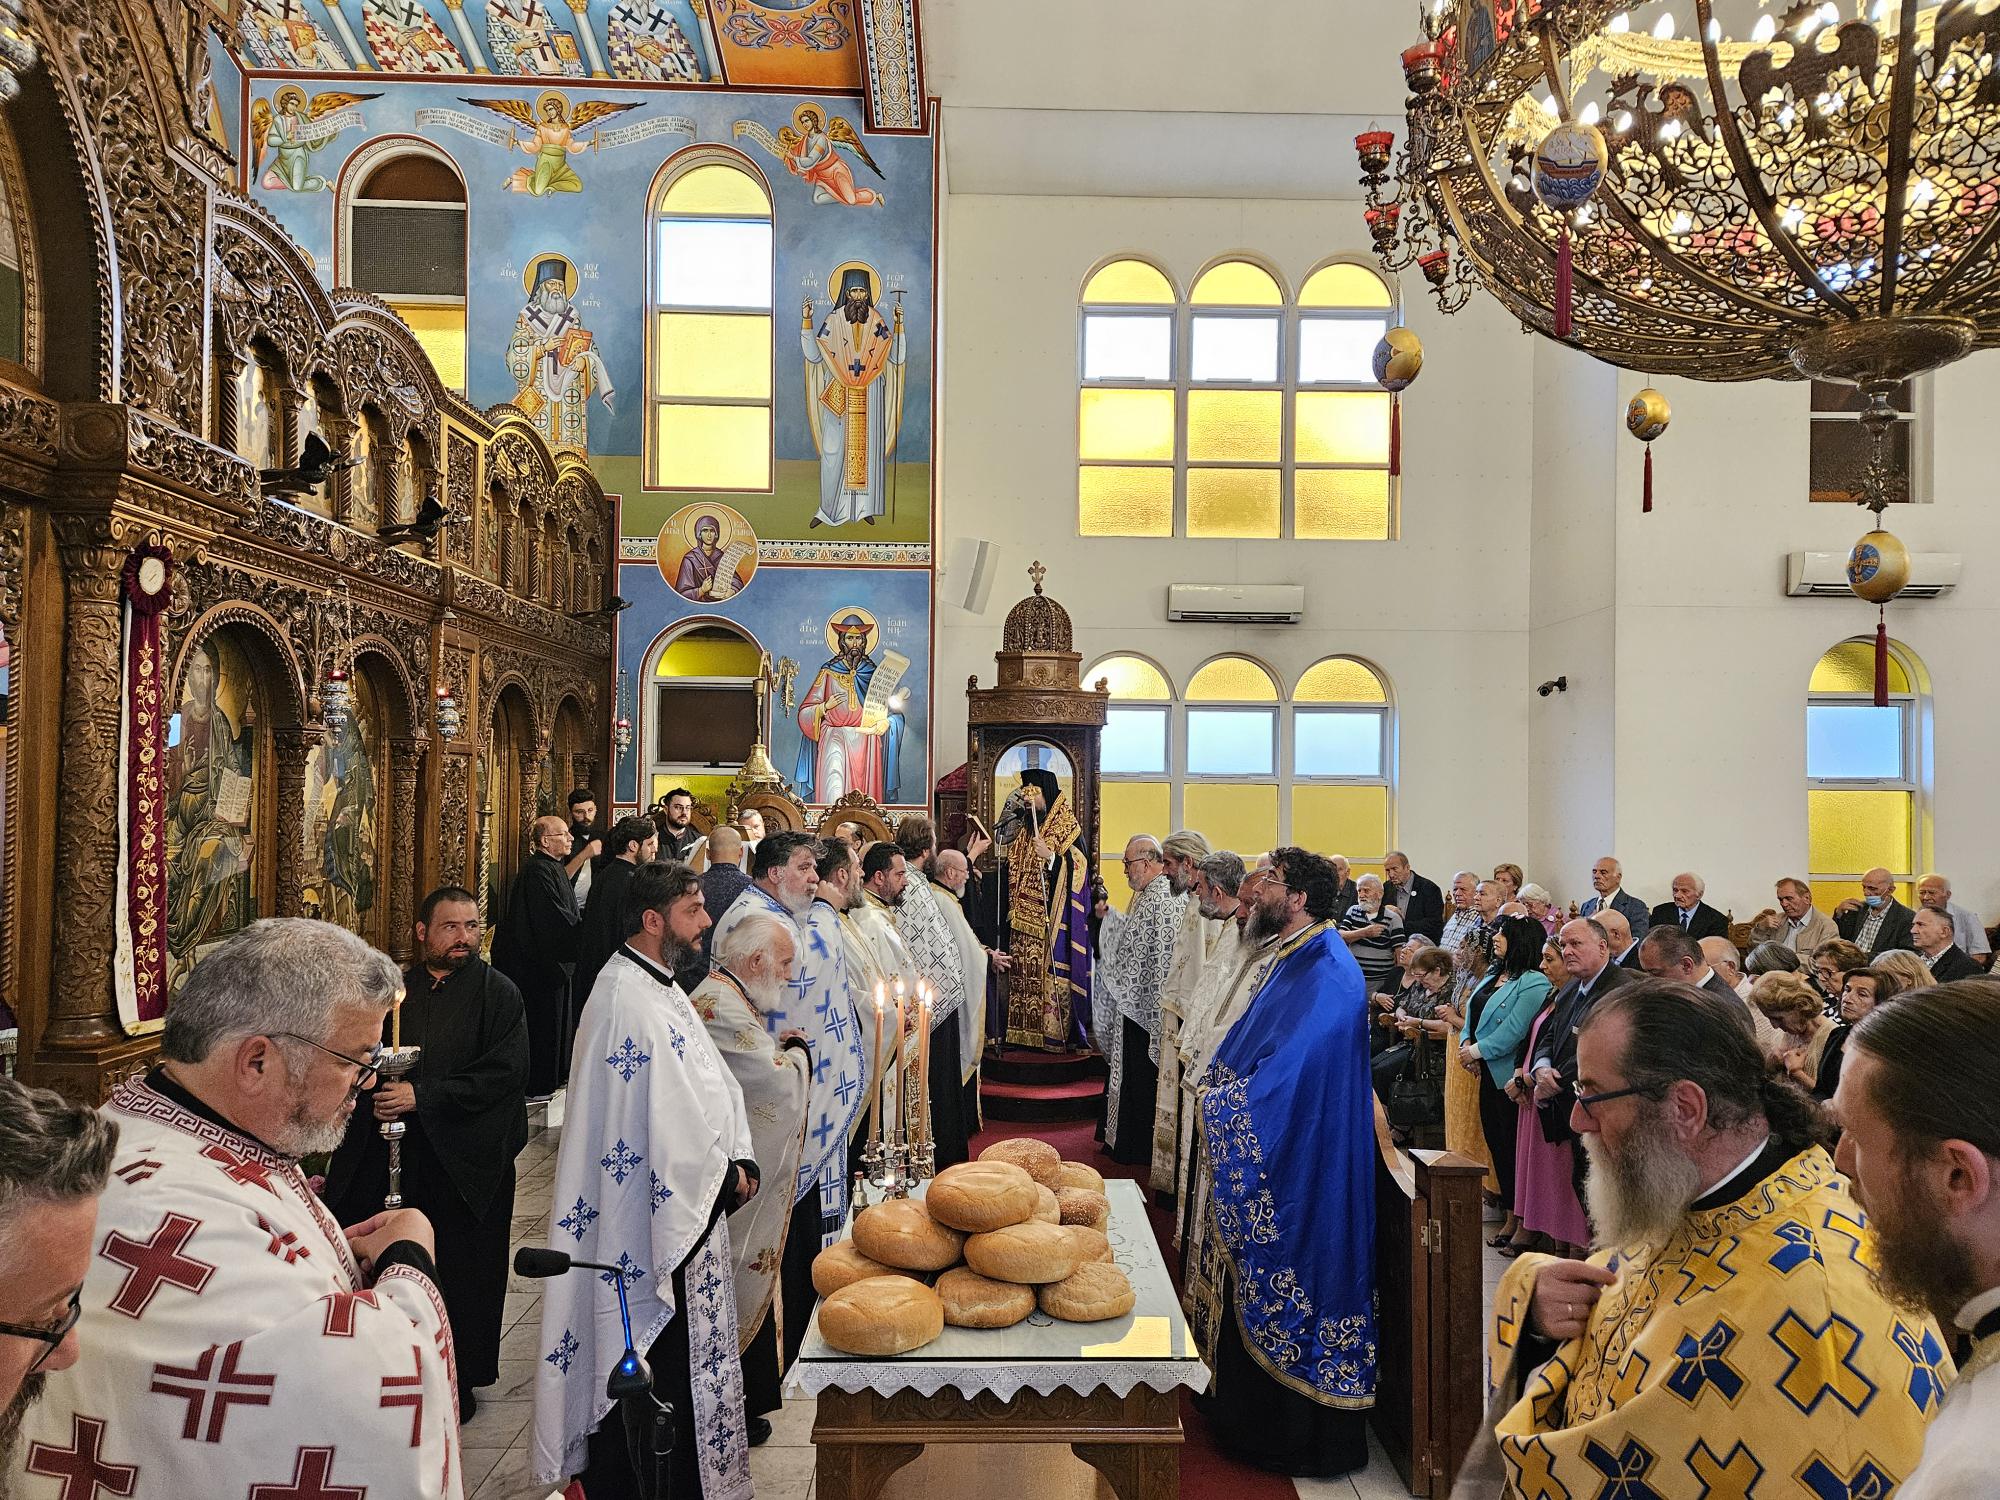 Northcote: The Feast Day of the Presentation of Our Lord in the Temple, Coburg